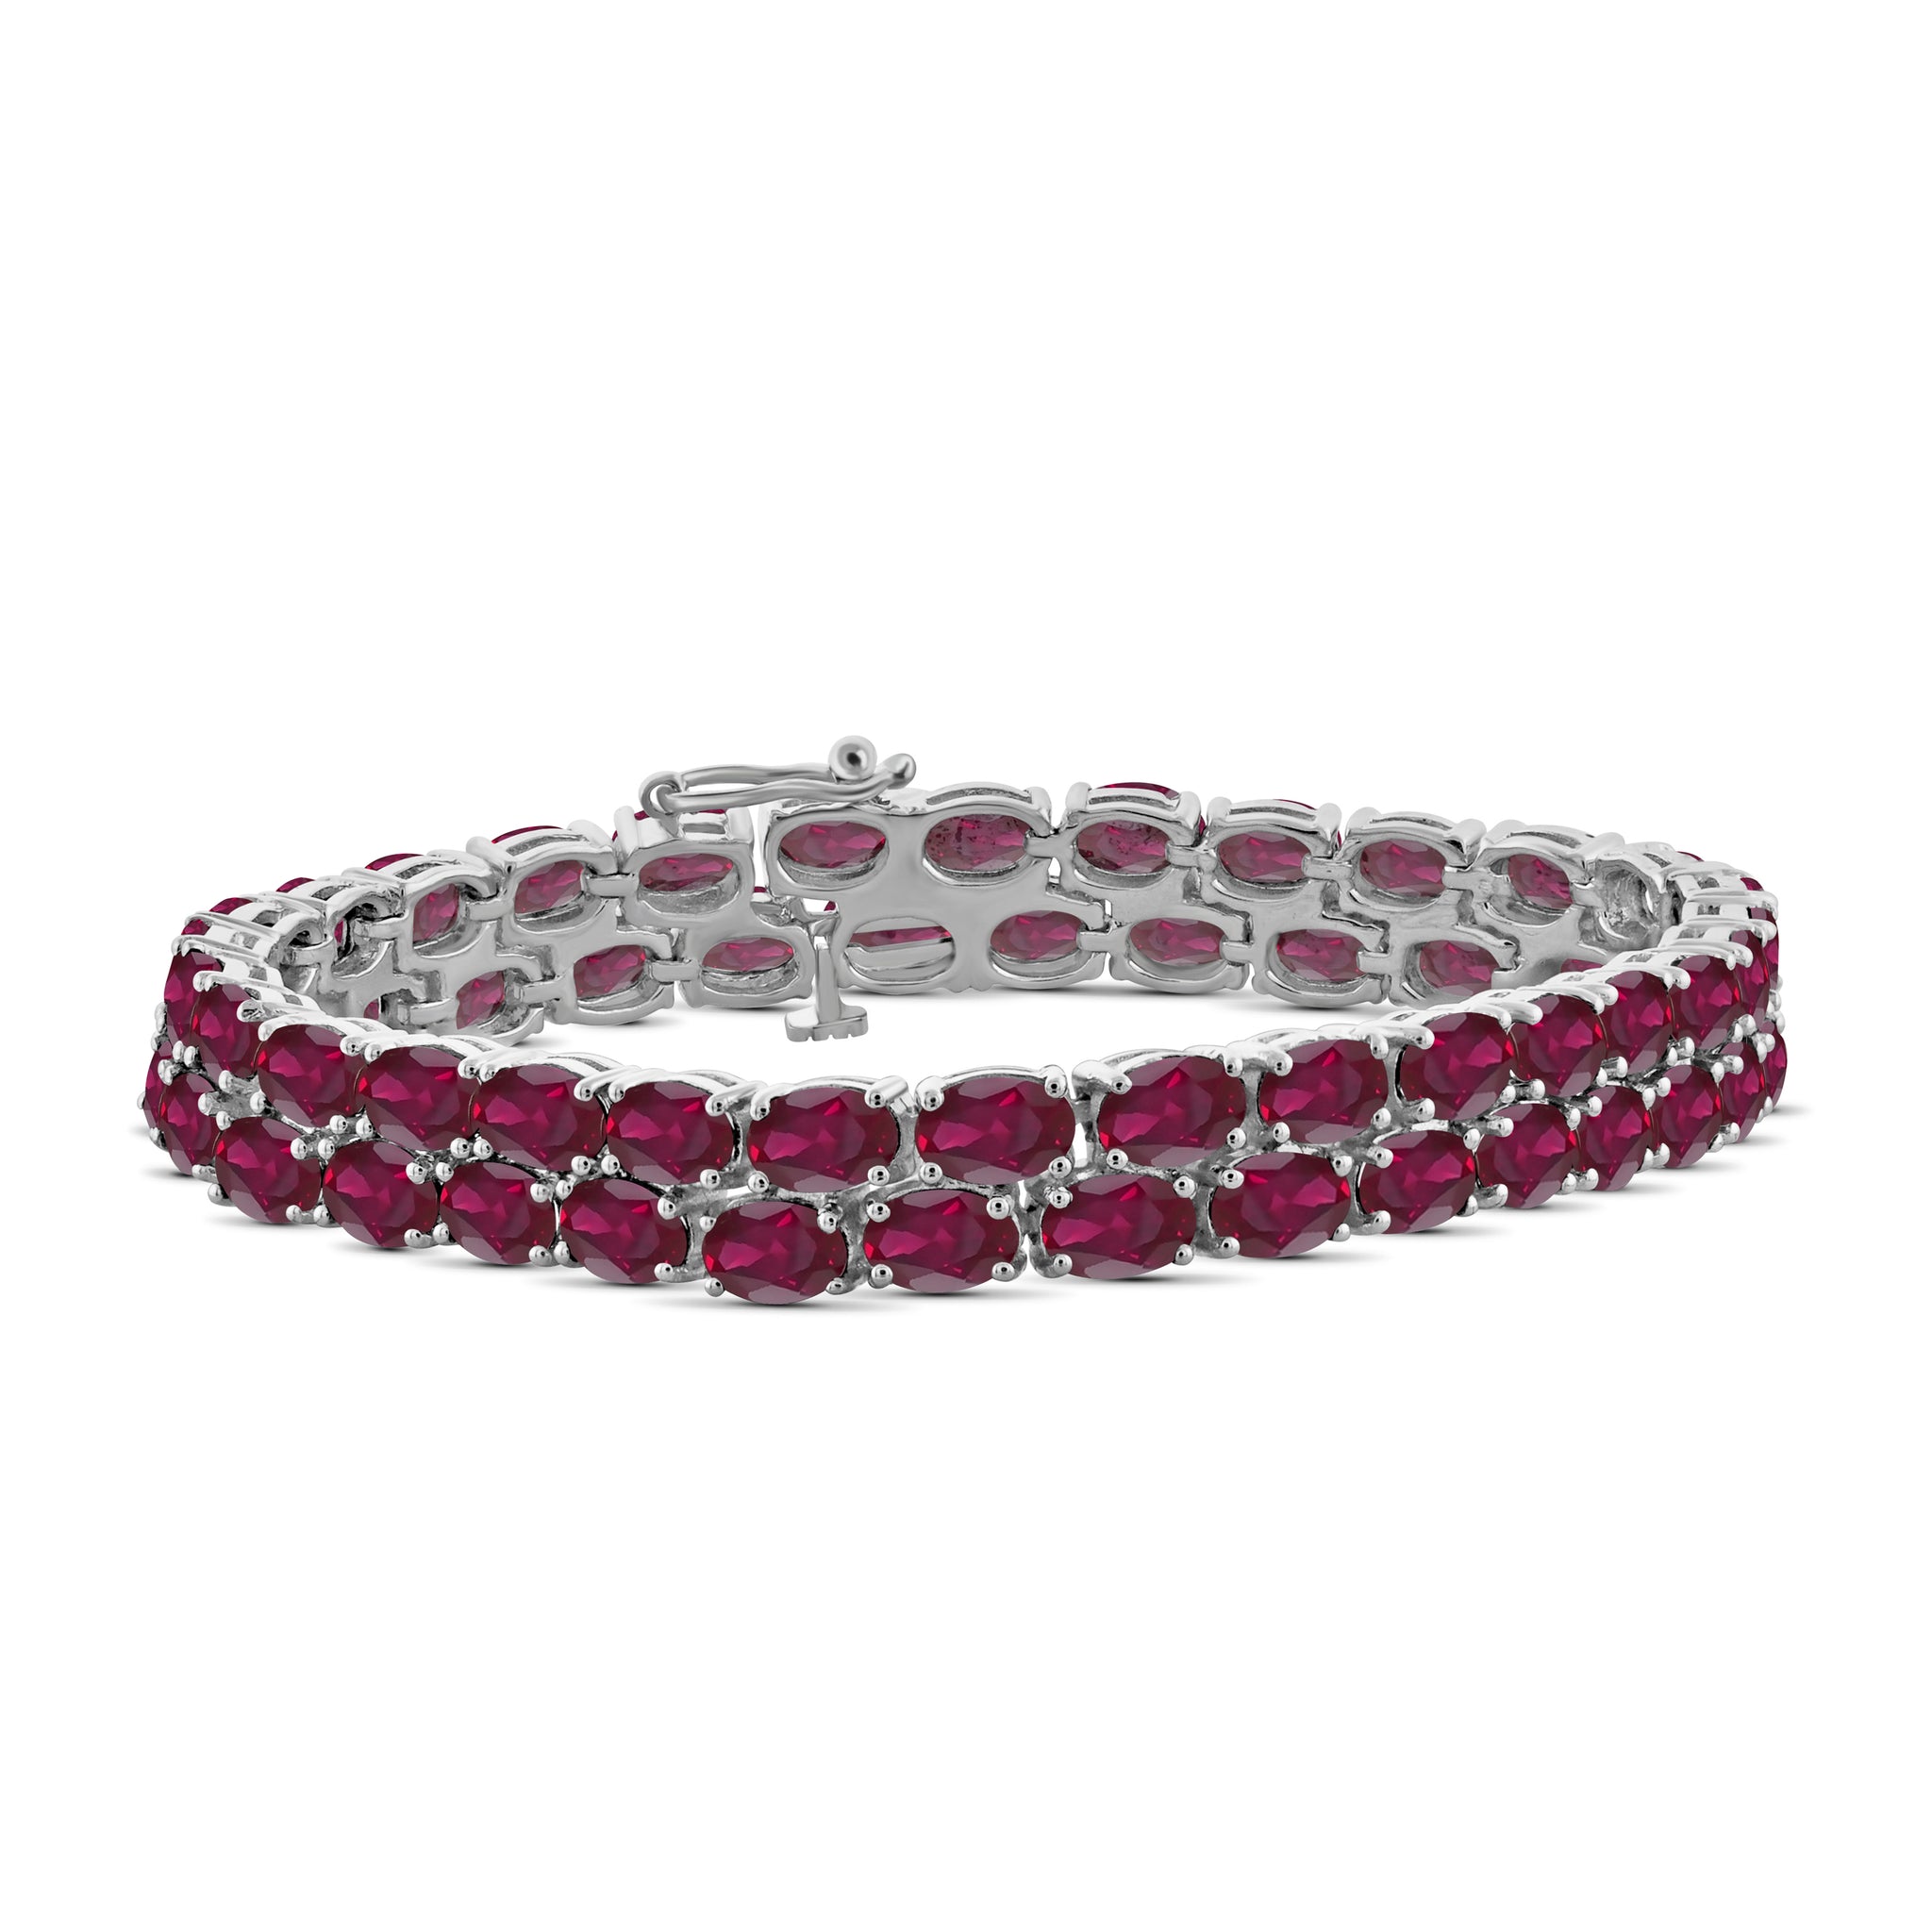 JewelonFire 28.80 Carat T.G.W. Genuine Ruby Sterling Silver Bracelet - Assorted Colors